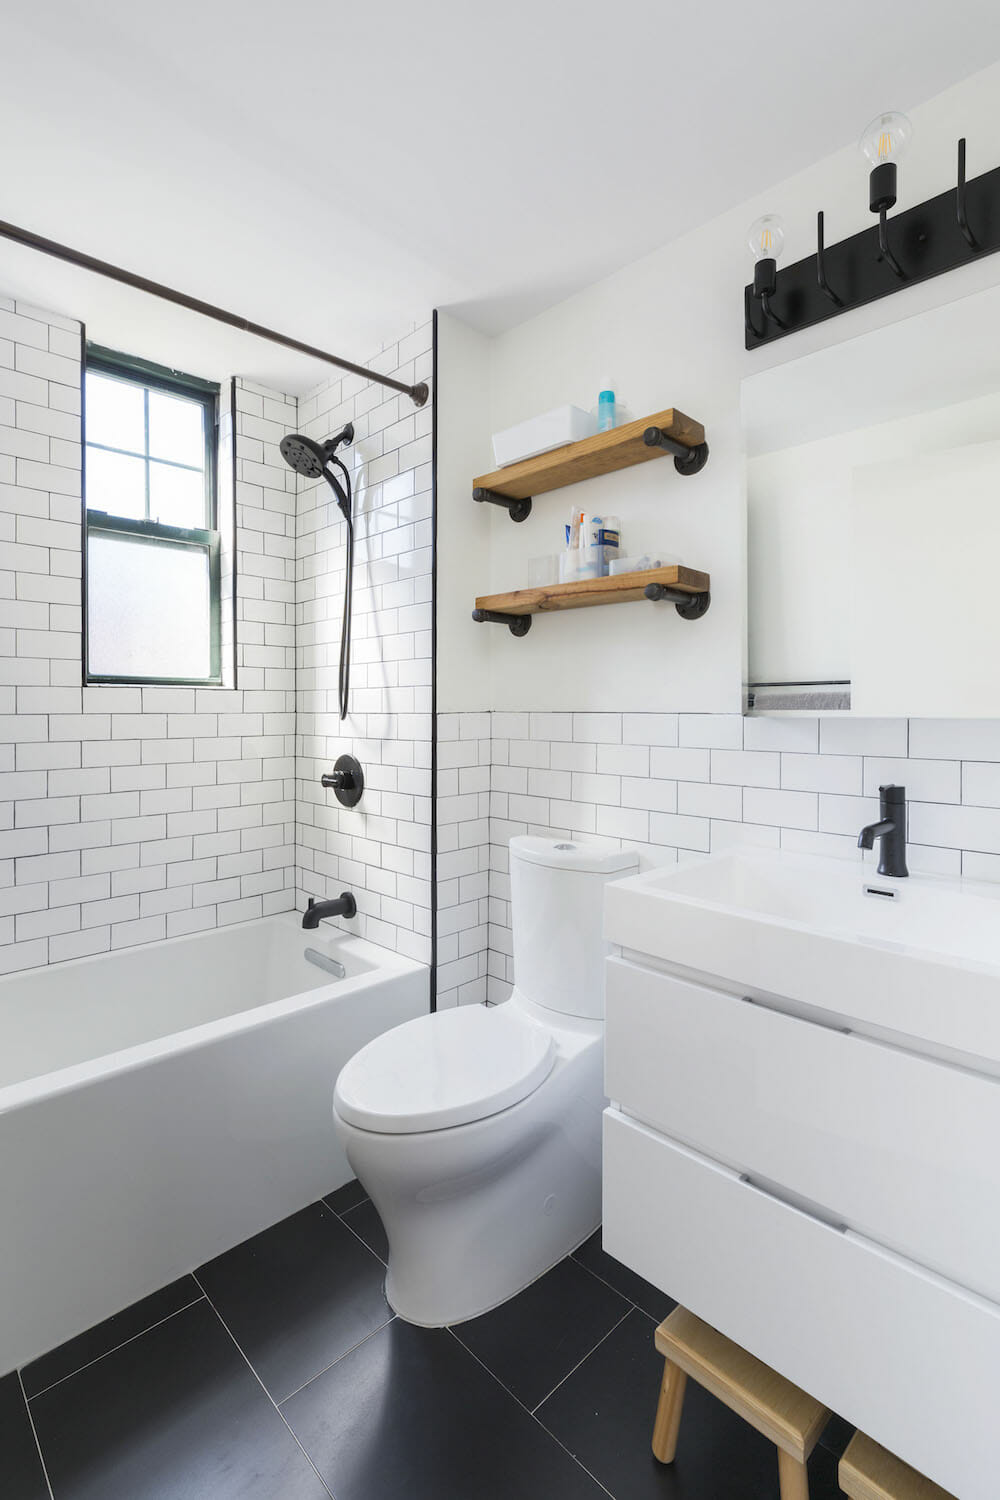 white subway tiles with black grout and black shower head and fixtures and bathtub and floating wooden shelves above toilet and floating vanity and black floor tiles after renovation